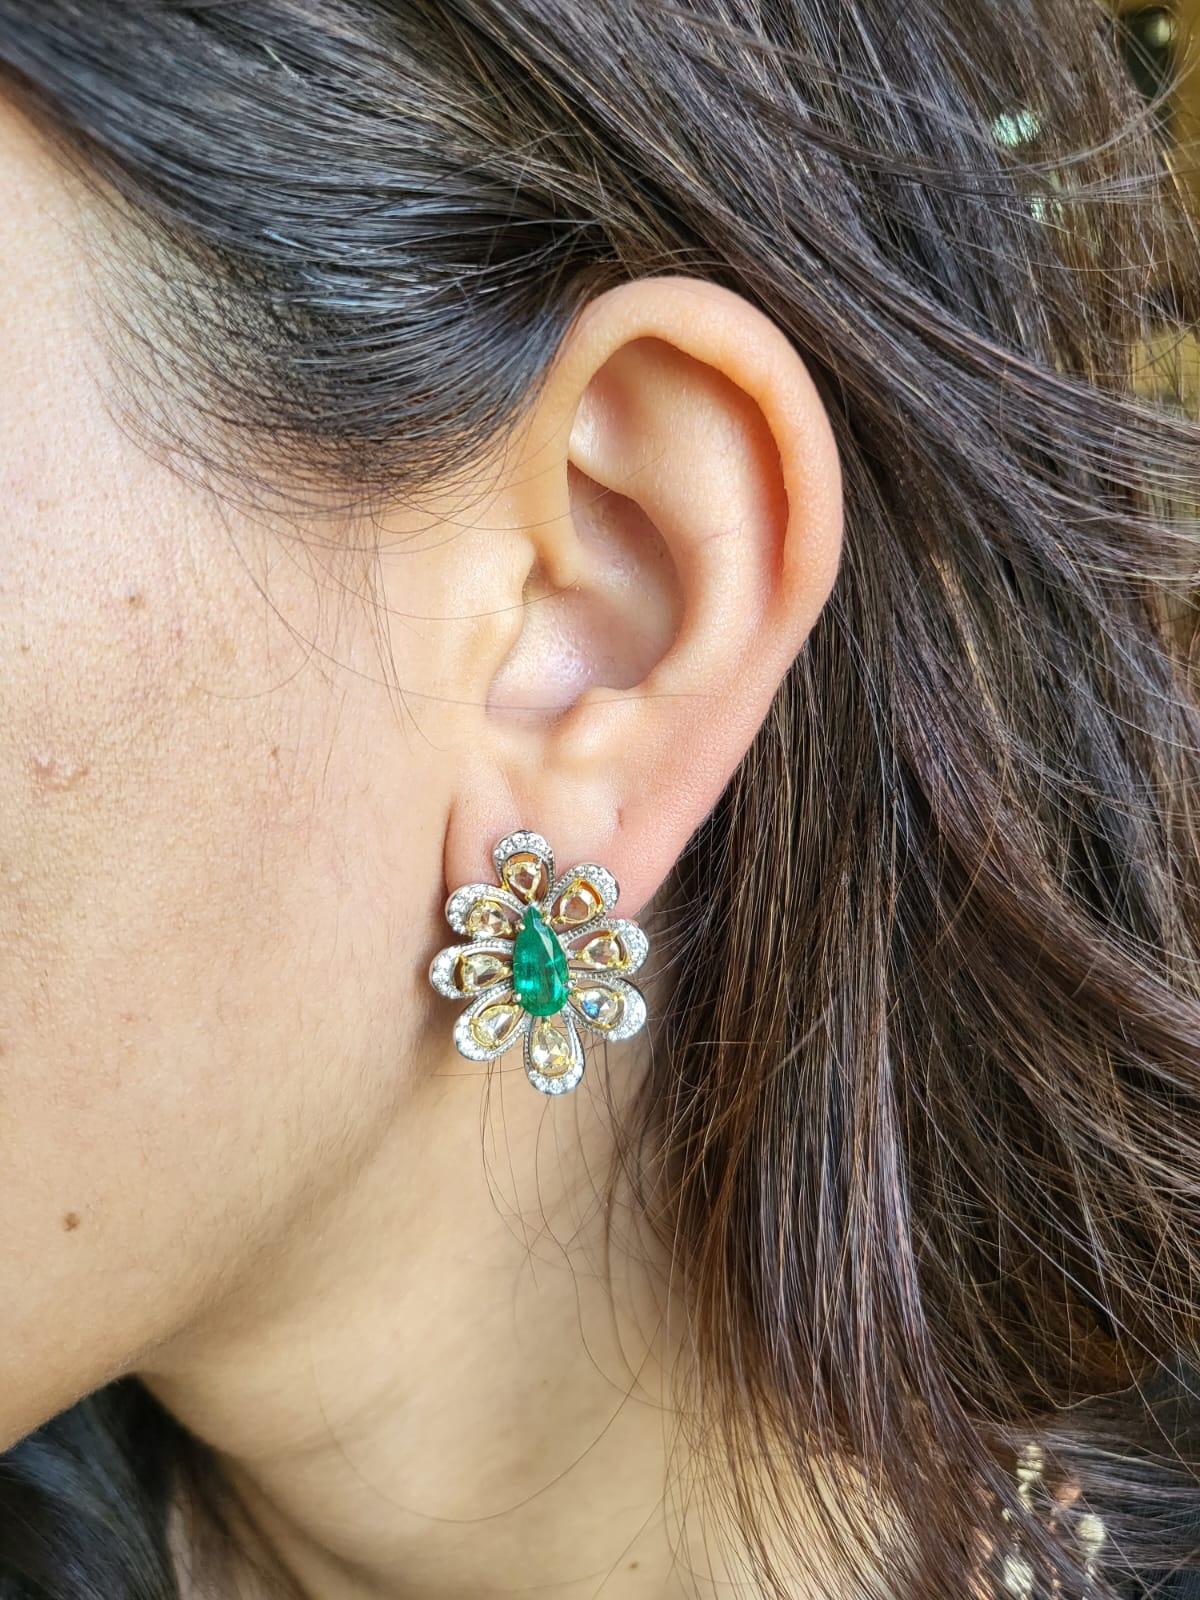 A very dainty and wearable Emerald Stud Earrings set in 18K Gold & Diamonds. The weight of the pear shaped Emeralds is 2.12 carats. The Emeralds are completely natural, without any treatment and is of Zambian origin. The combined Diamonds weight is